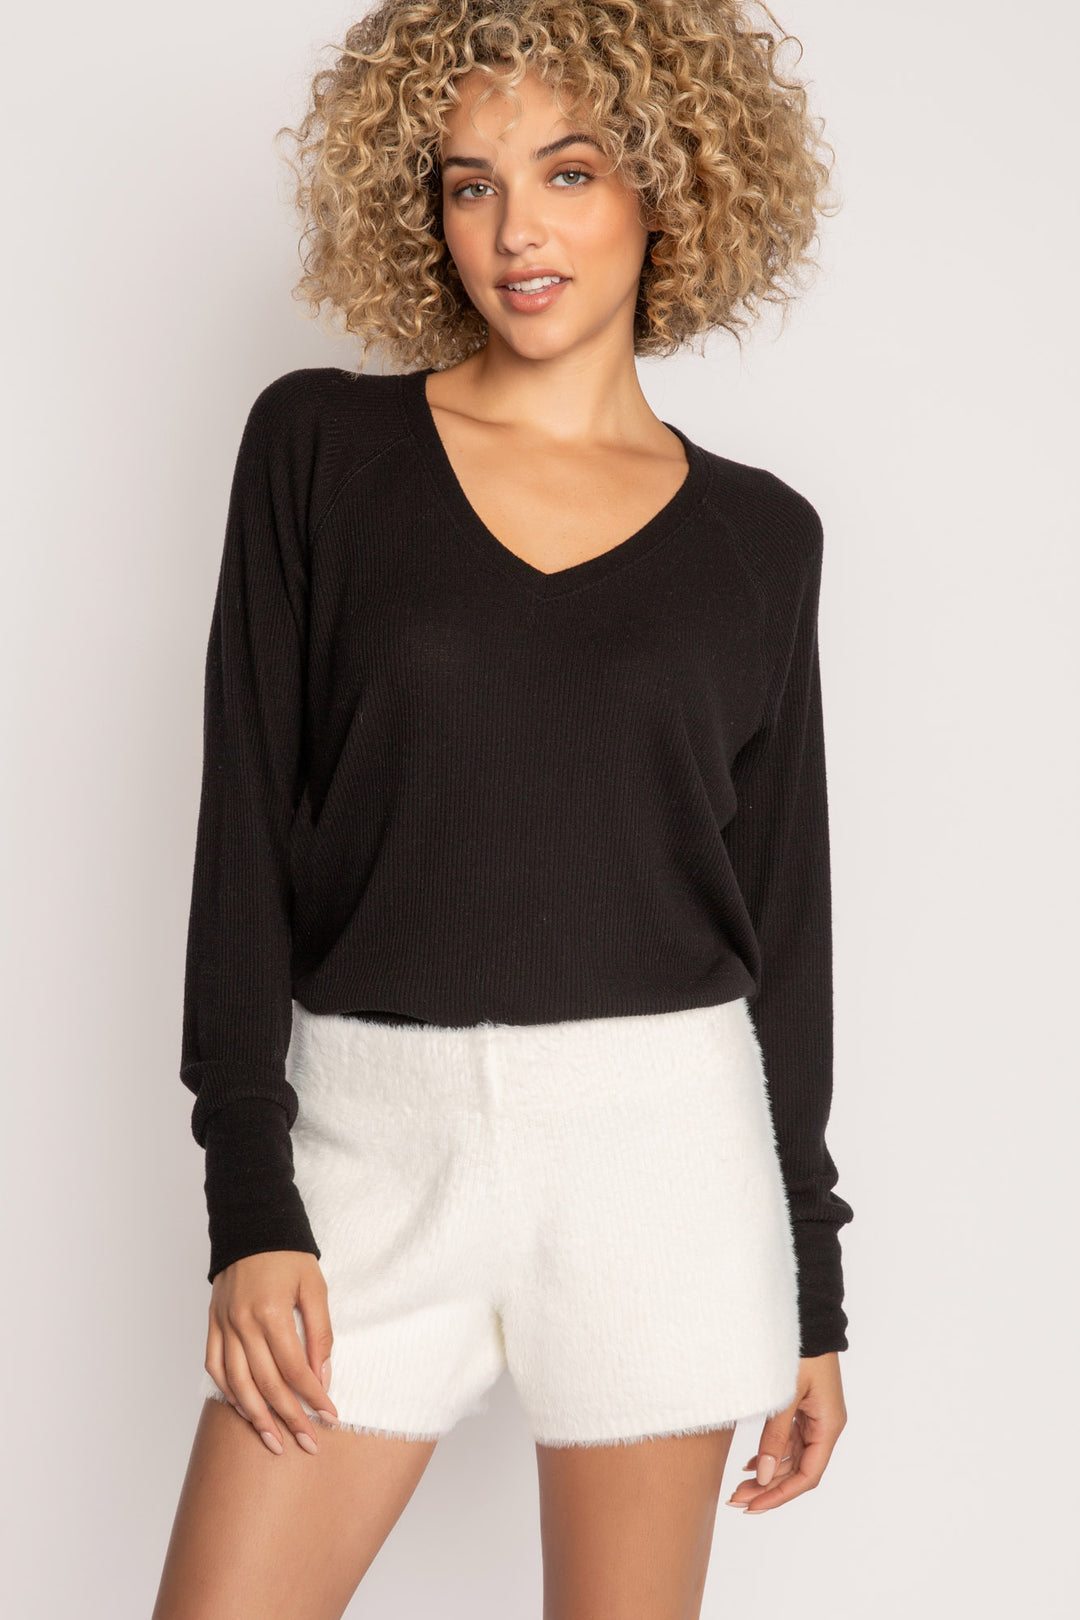 Soft ivory feather knit short with rib waistband. Relaxed, pull-on fit, no ties or pockets. (7257680347236)